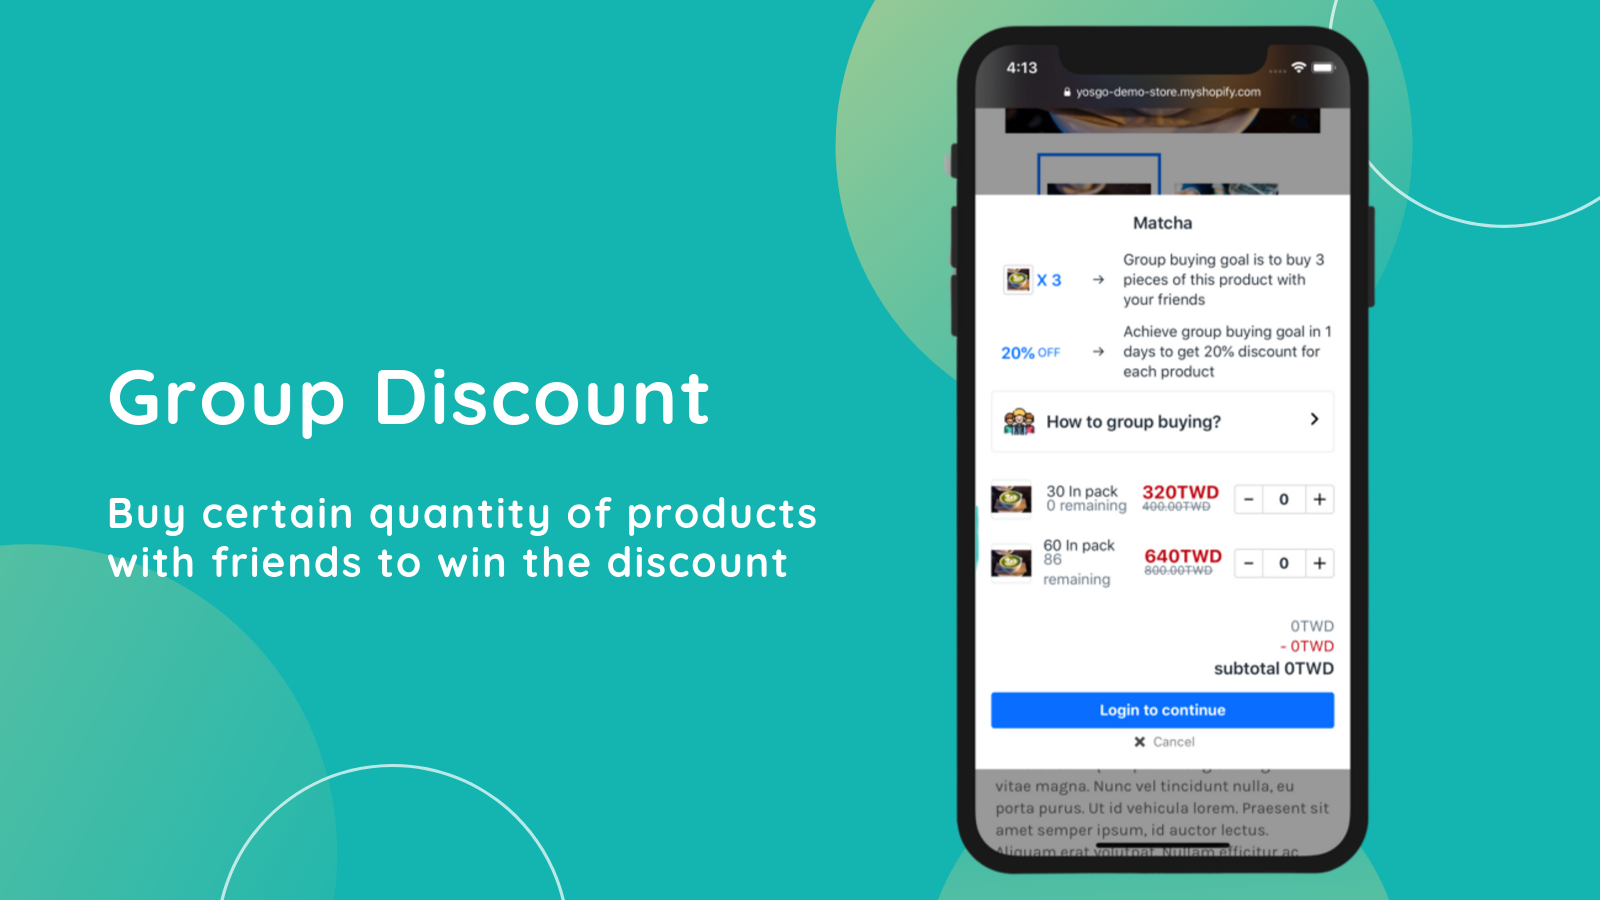 Buy enough products with friends to win the discoun